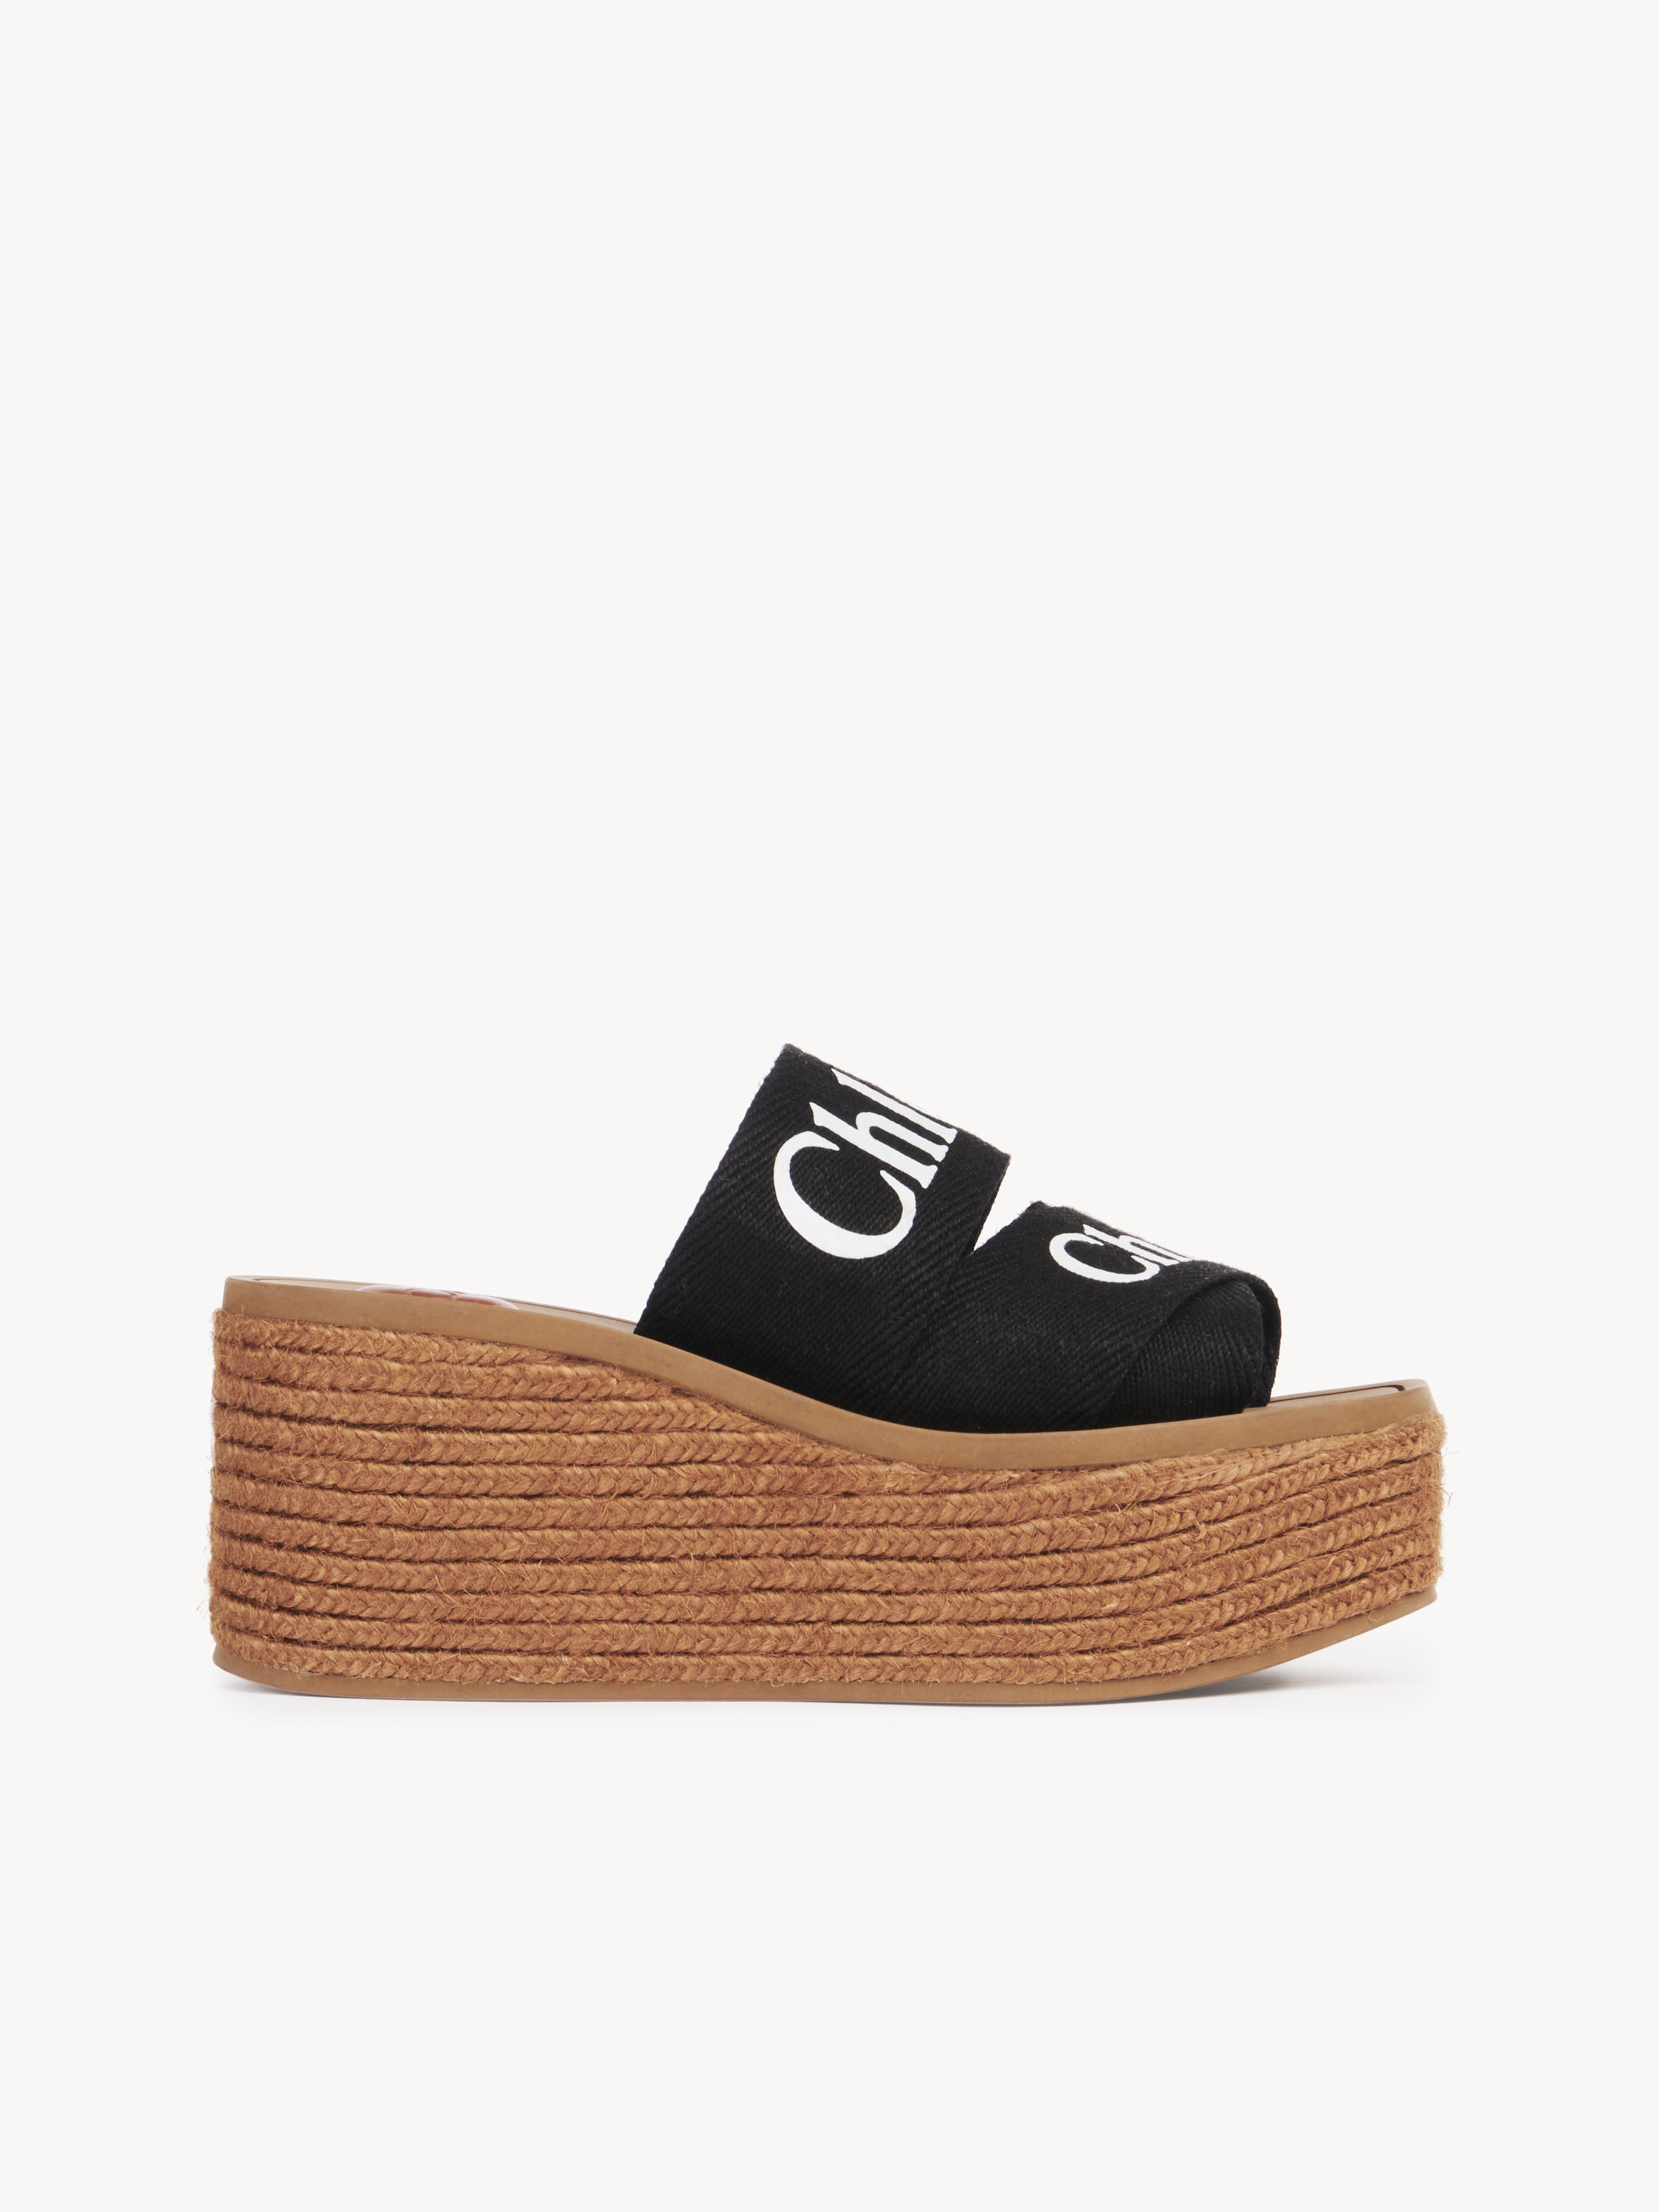 Chloé Woody Wedge Espadrille Black Size 8 90% Linen, 10% Polyester, Quercus Suber, Farmed, Coo Spain In Noir